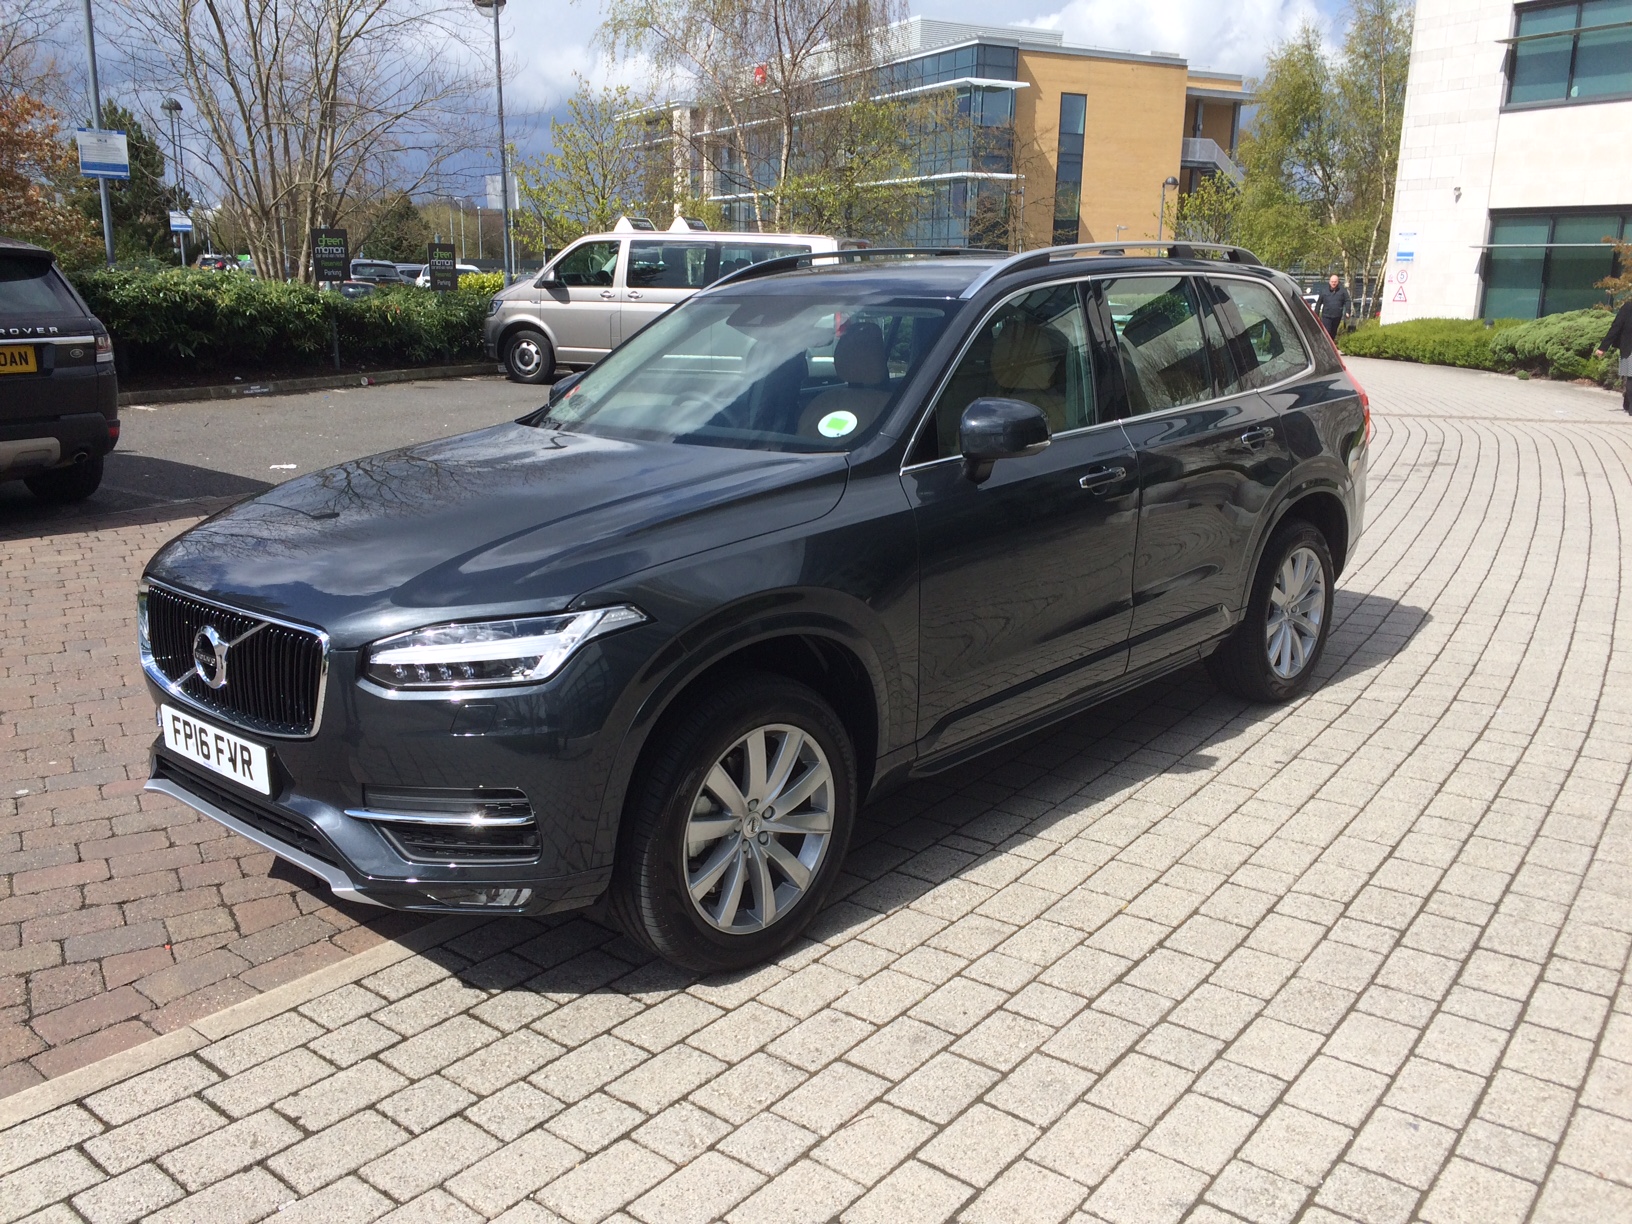 Green Motion Manchester adds the 2016 Volvo XC90 to the fleet